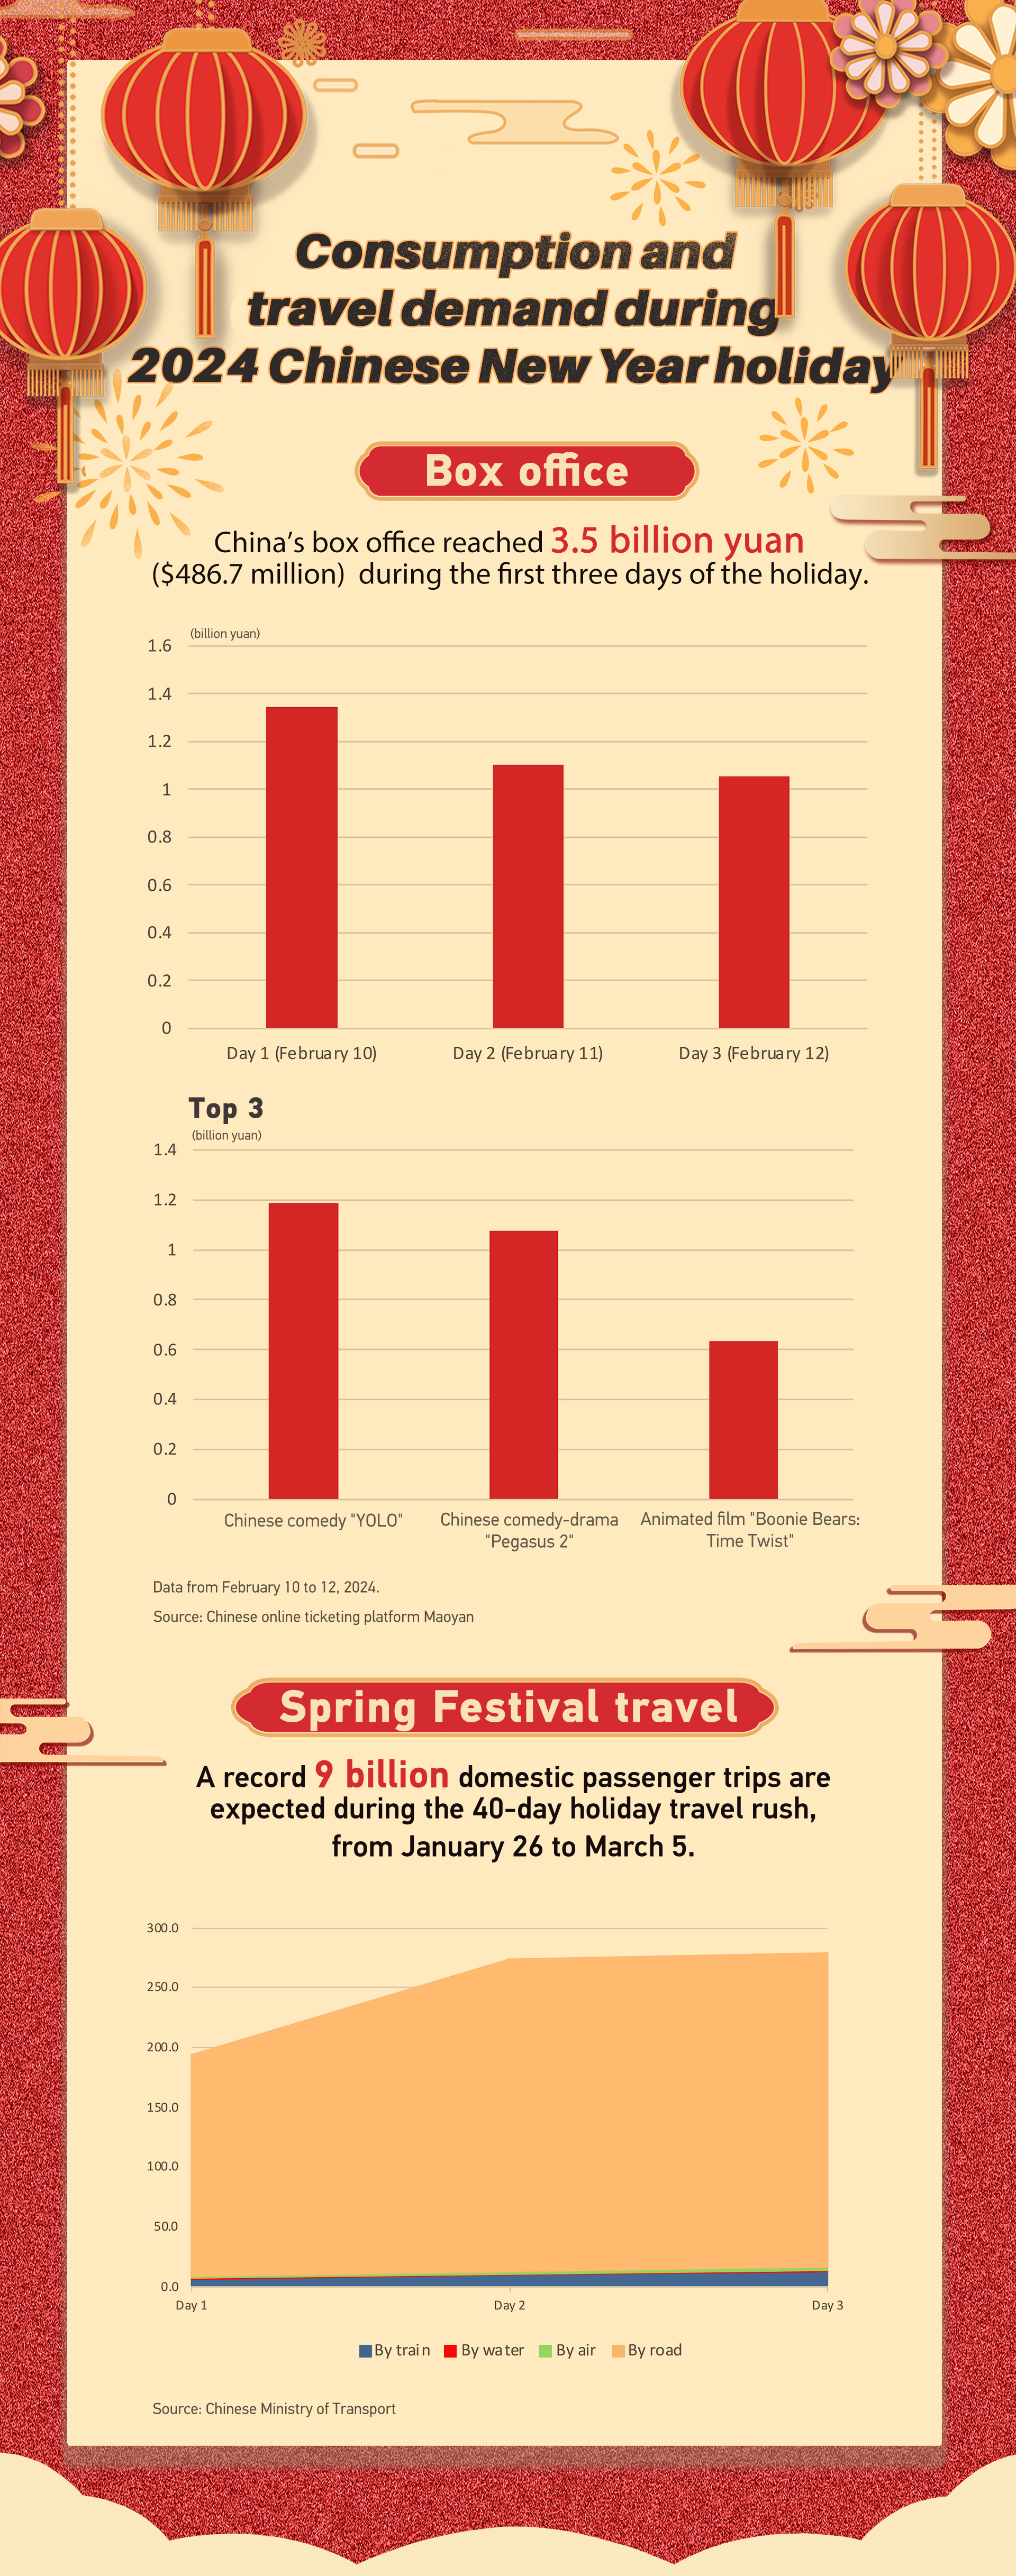 Chinese shoppers, travelers show strong consumption power during Spring Festival